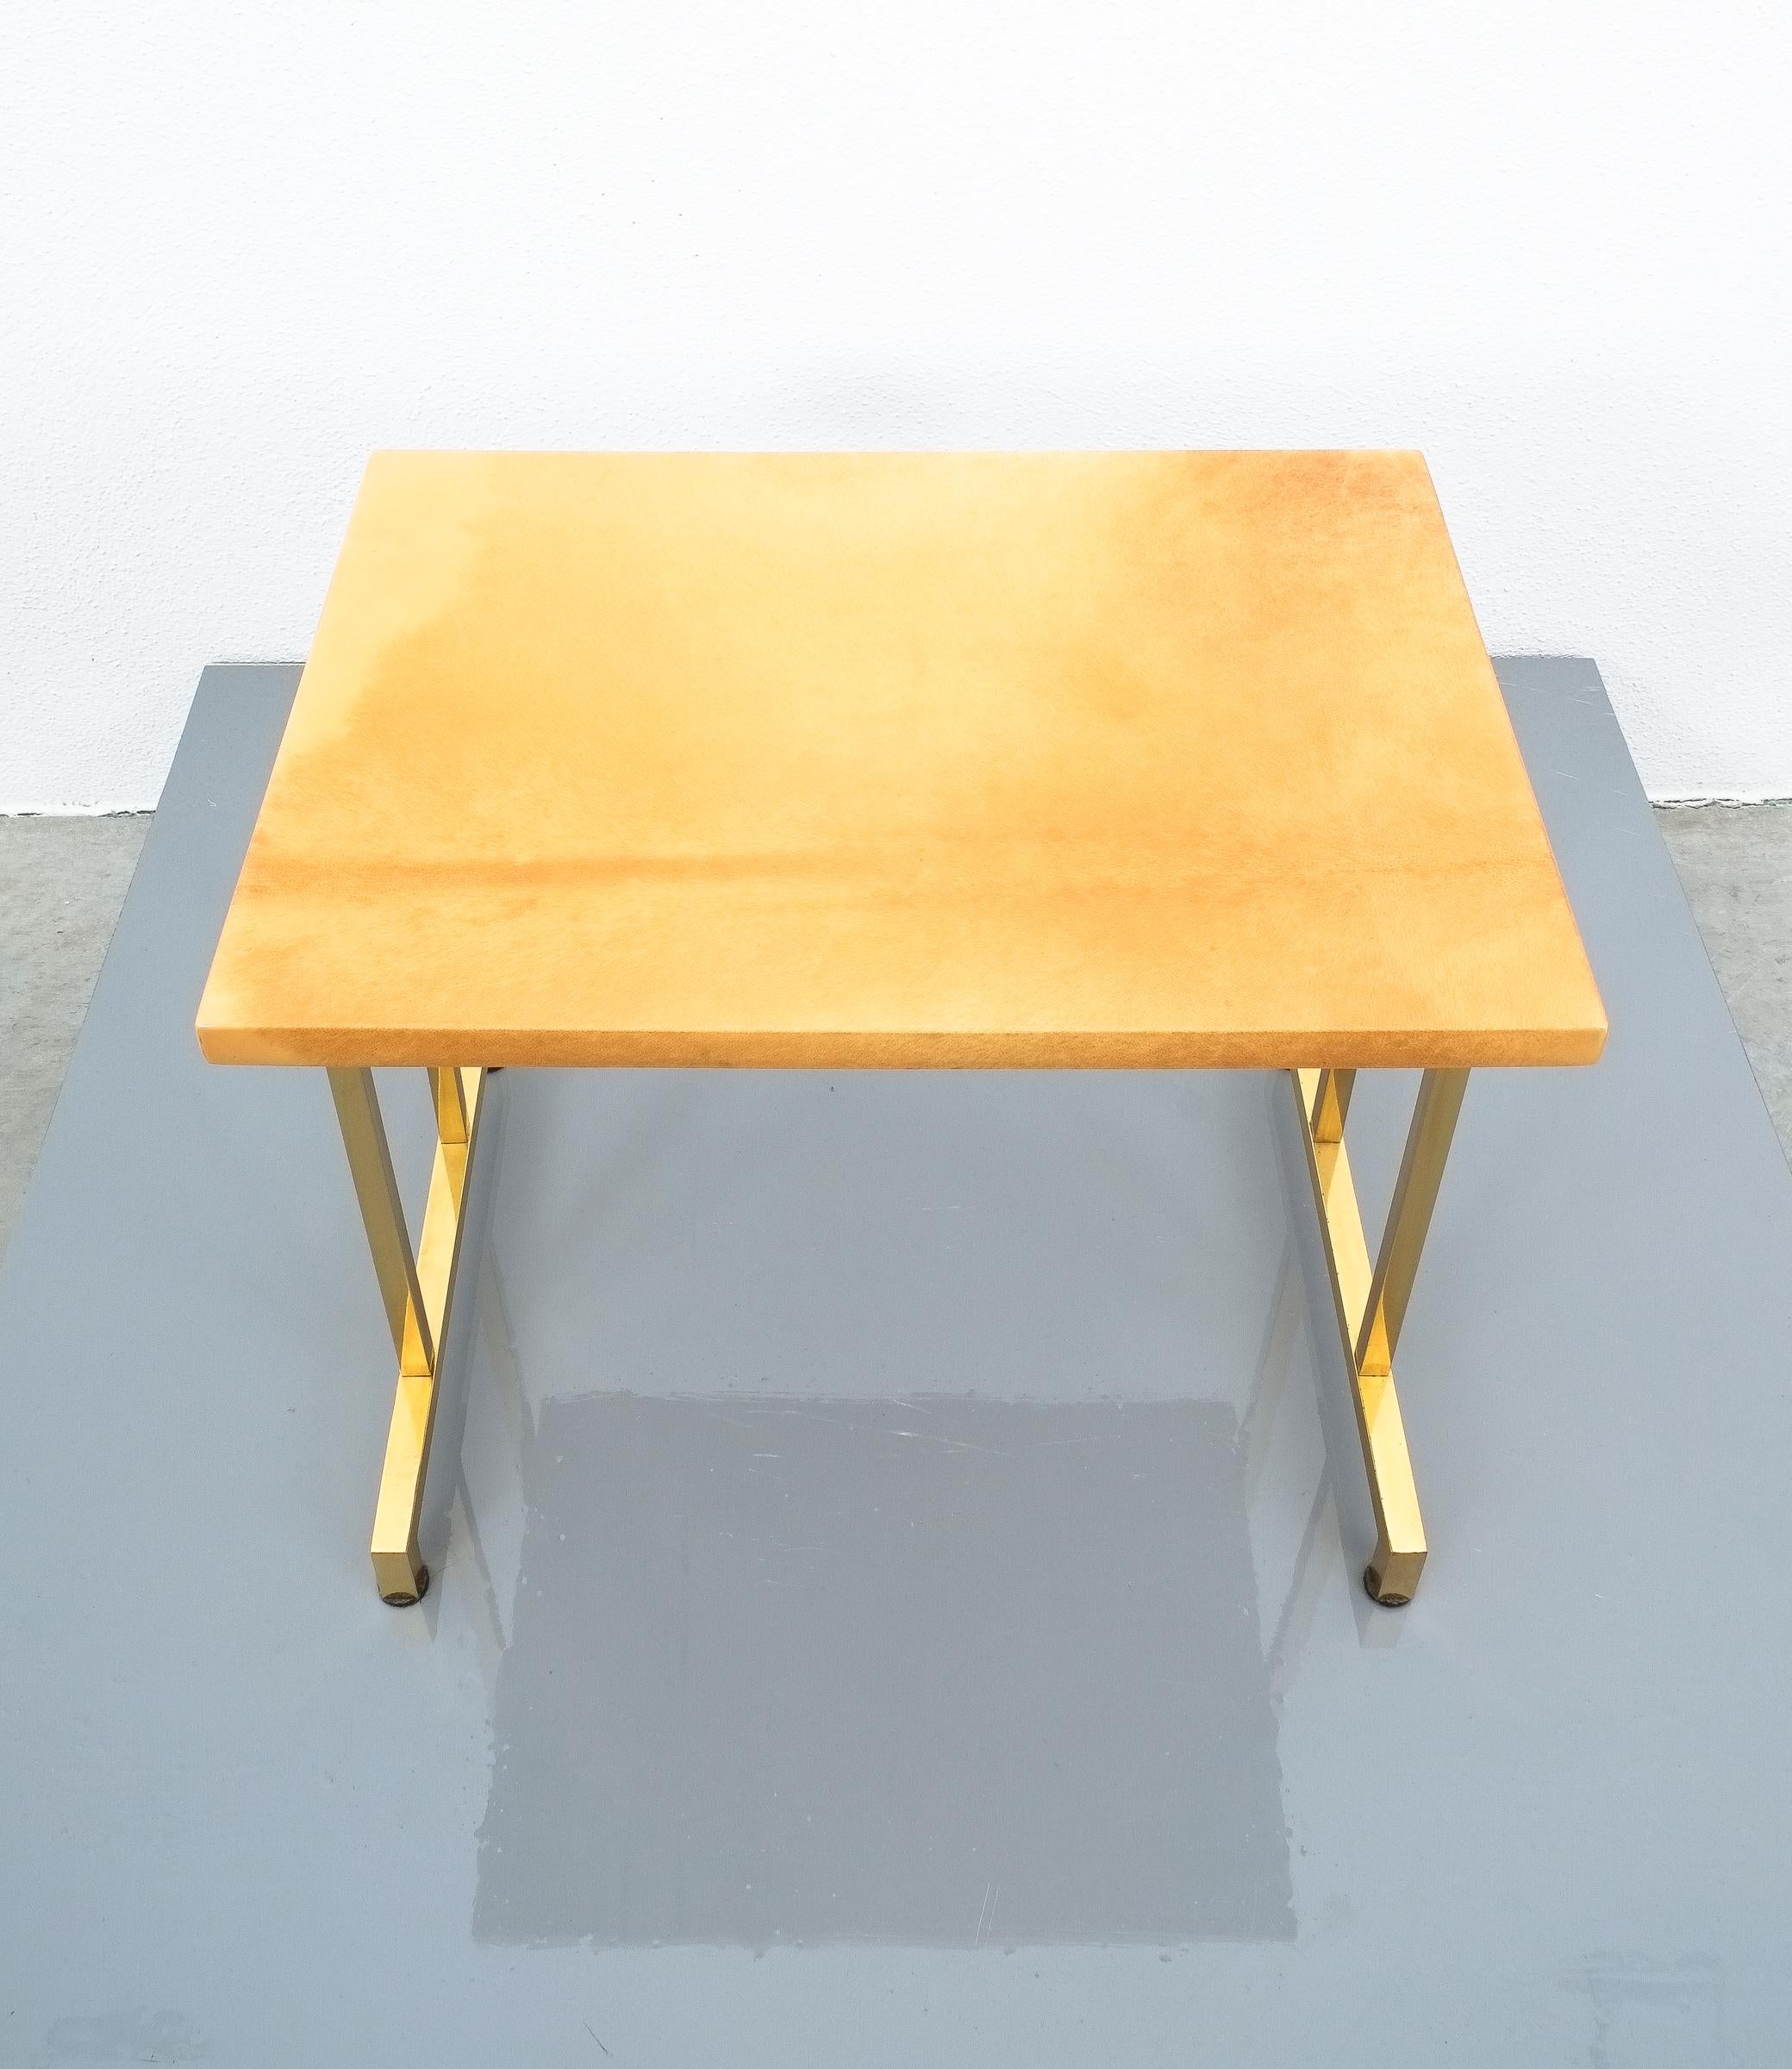 Dyed Pair of Tan Parchment Brass Coffee or Side Tables Aldo Tura, Italy, 1970 For Sale